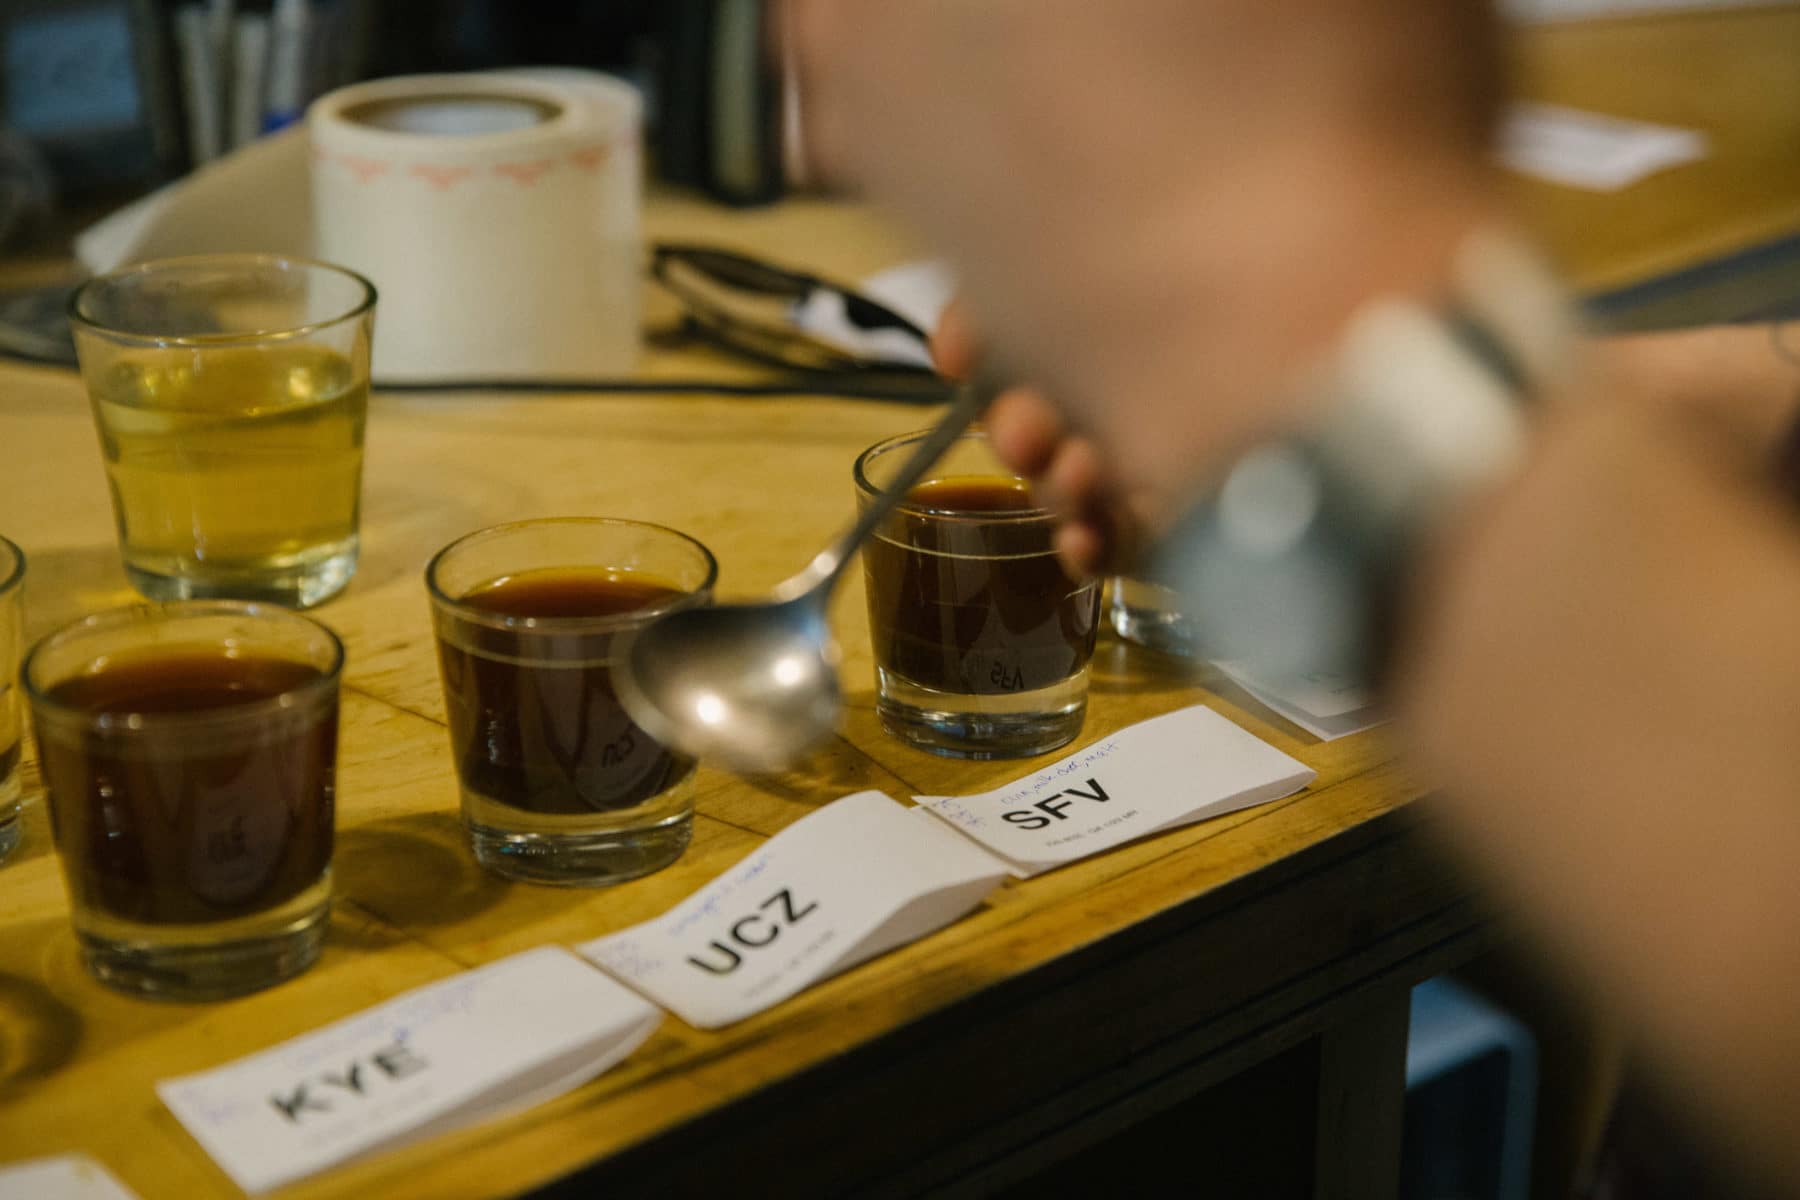 Cupping is a certified, worldwide method for evaluating coffee.